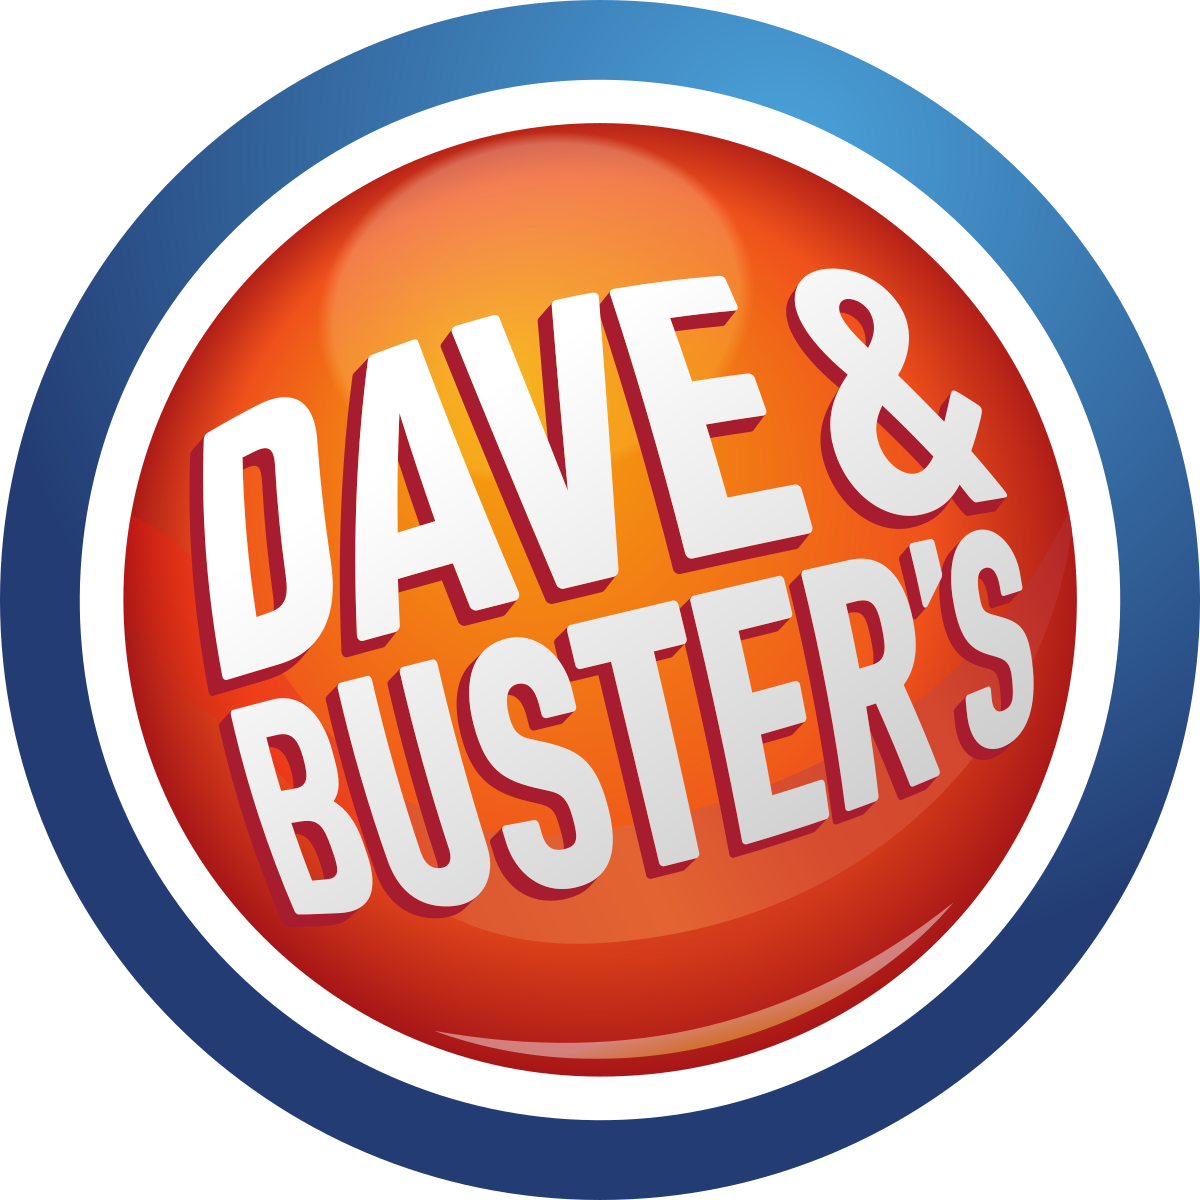 Dave_&_Buster's_2014